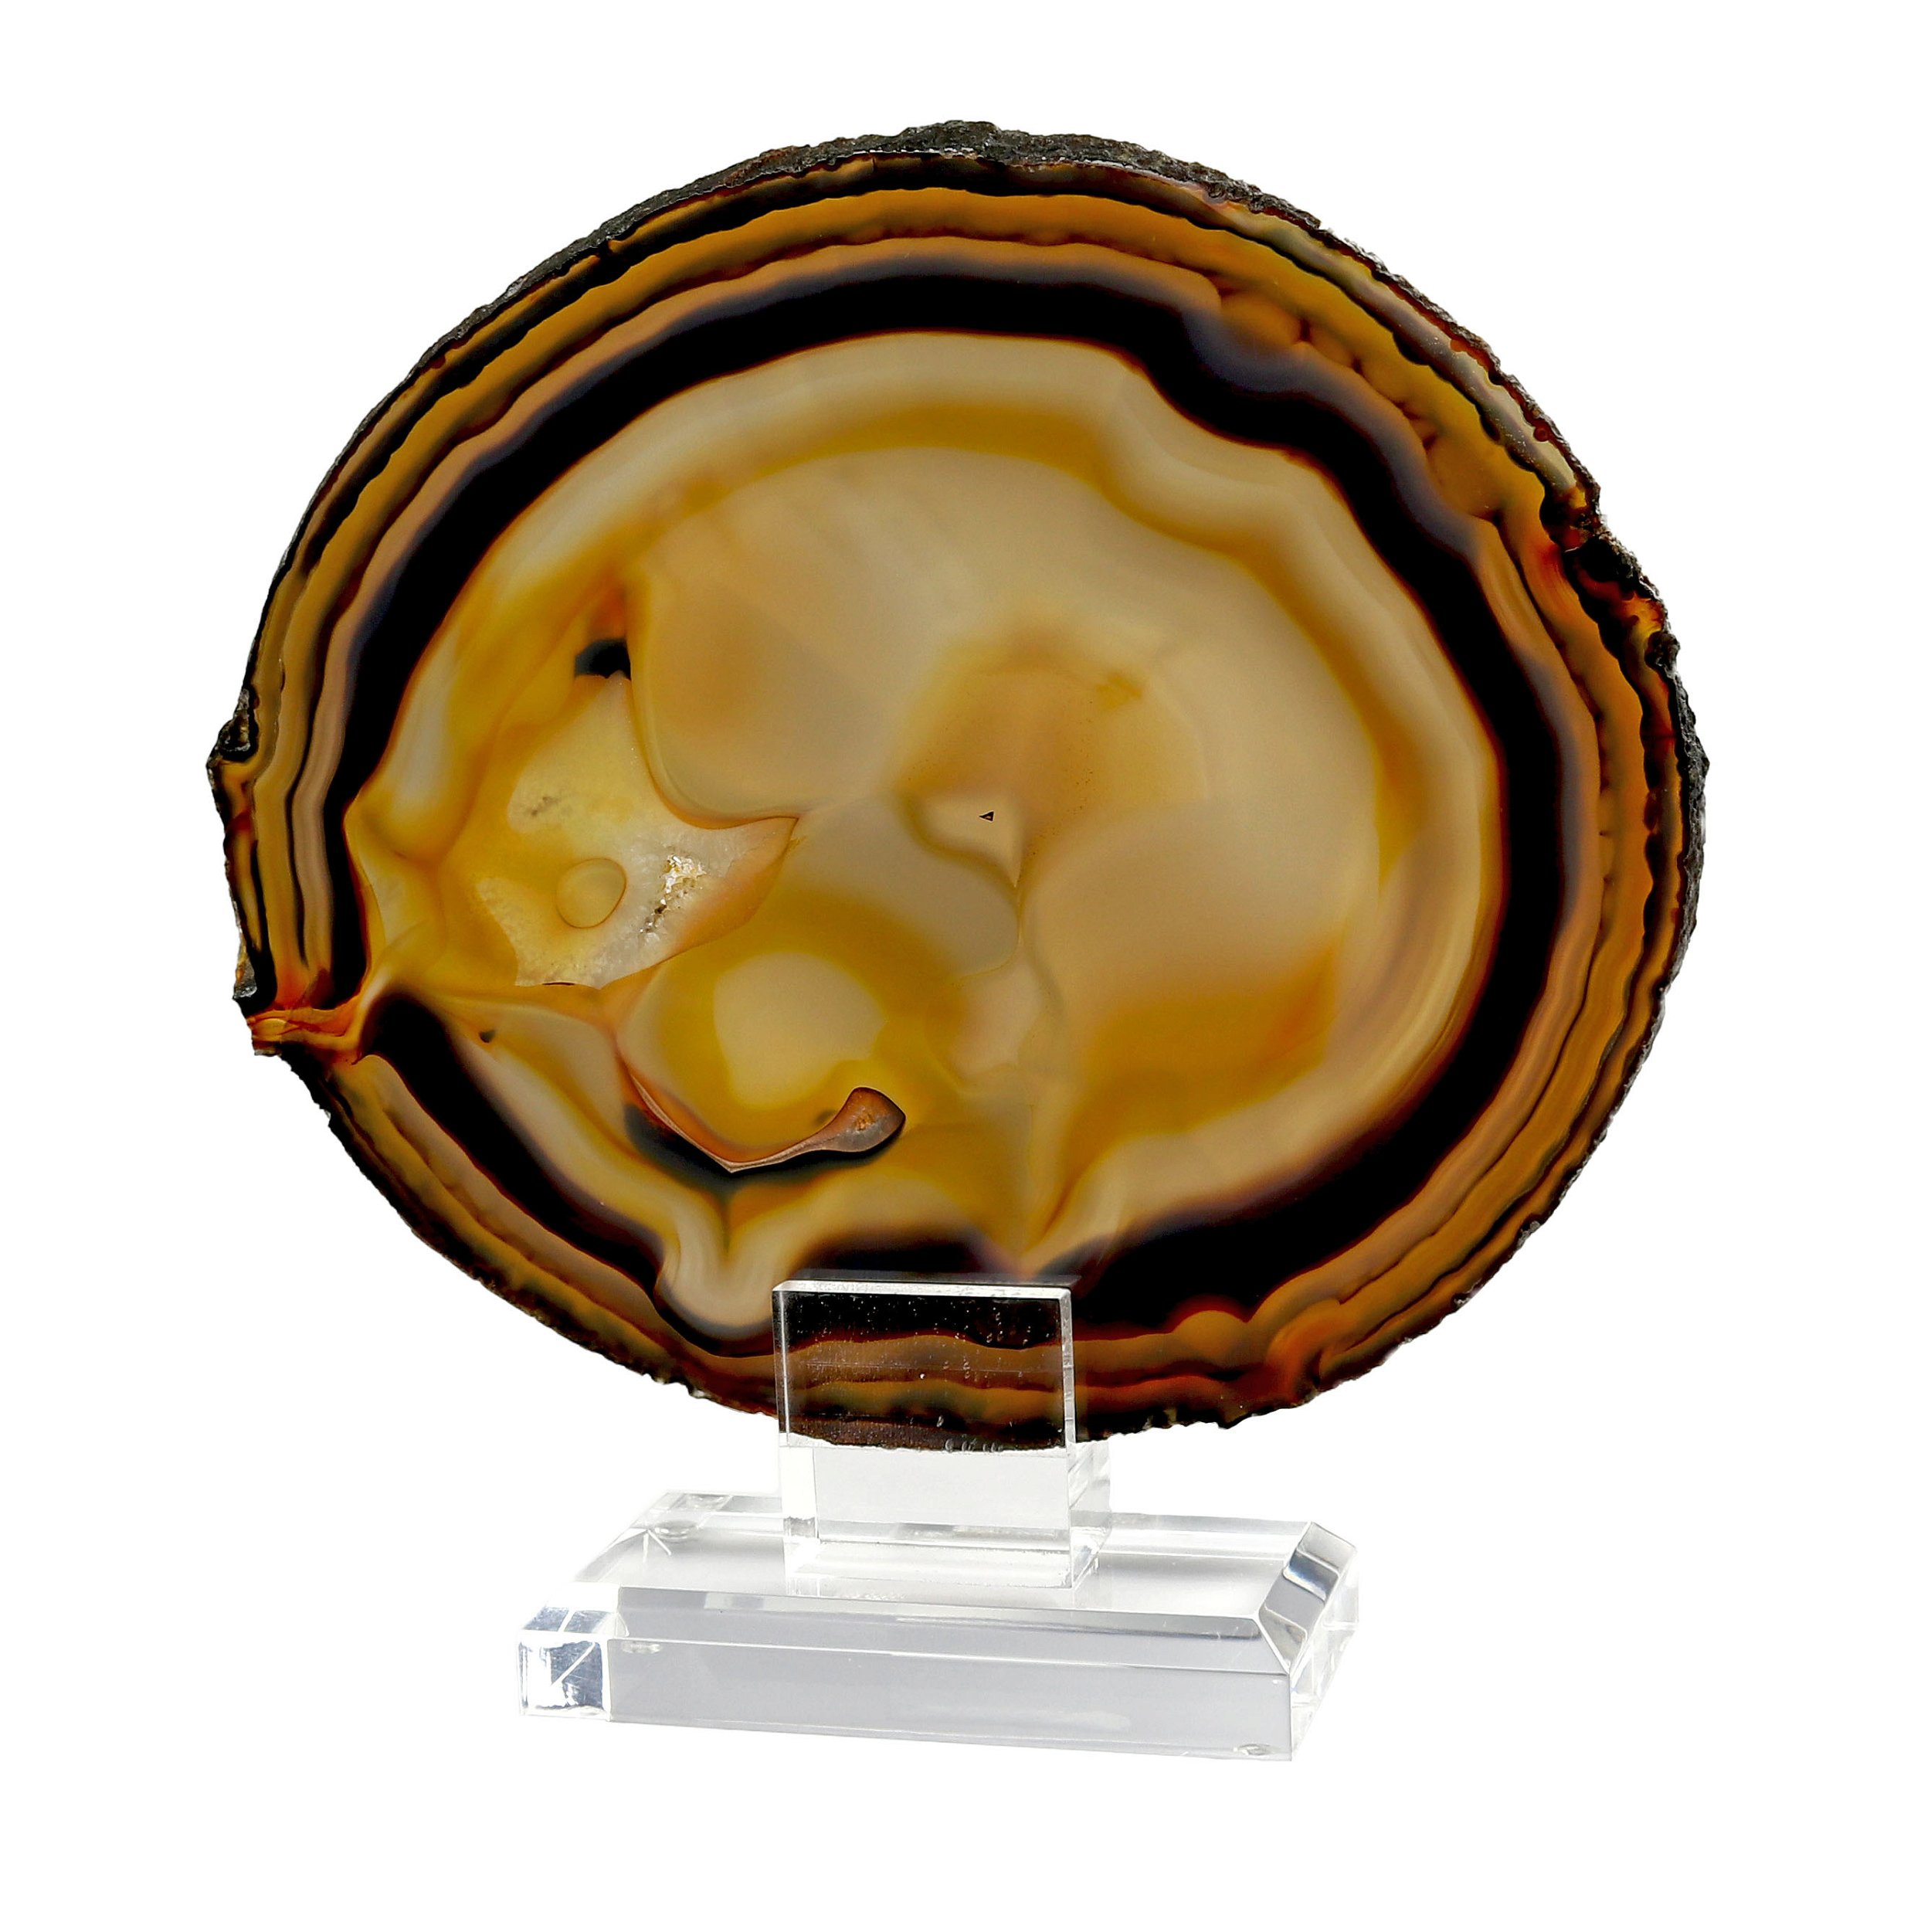 Agate Slice On Acrylic Screw-in Stand With Dendrite -Like Pattern & Orange Hues